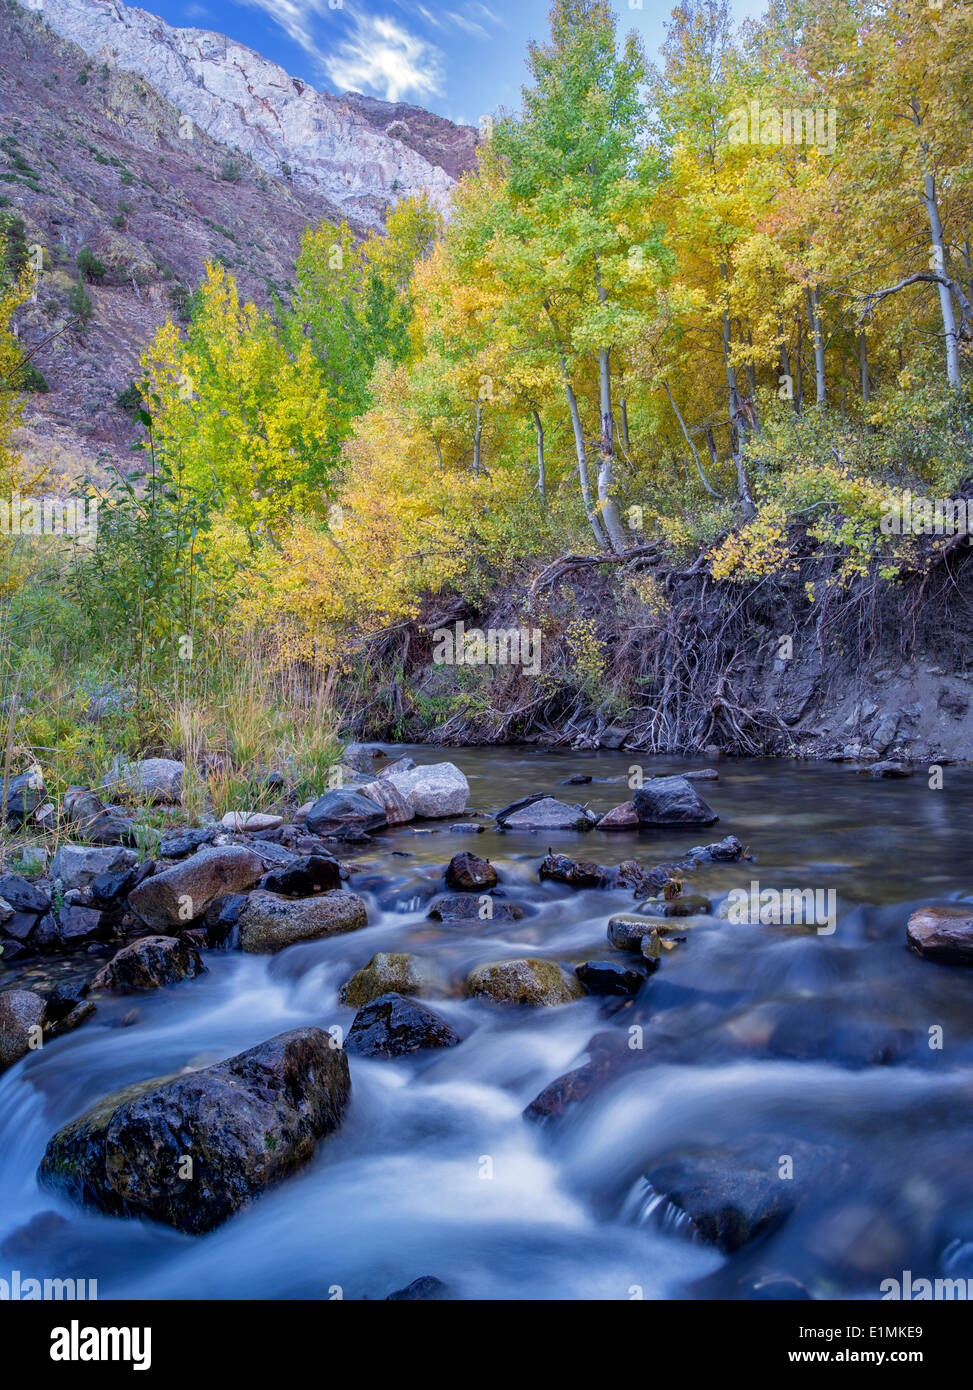 Mcgee Creek and fall colored aspens, Inyo National Forest, Eastern Sierra Nevada mountains, California Stock Photo